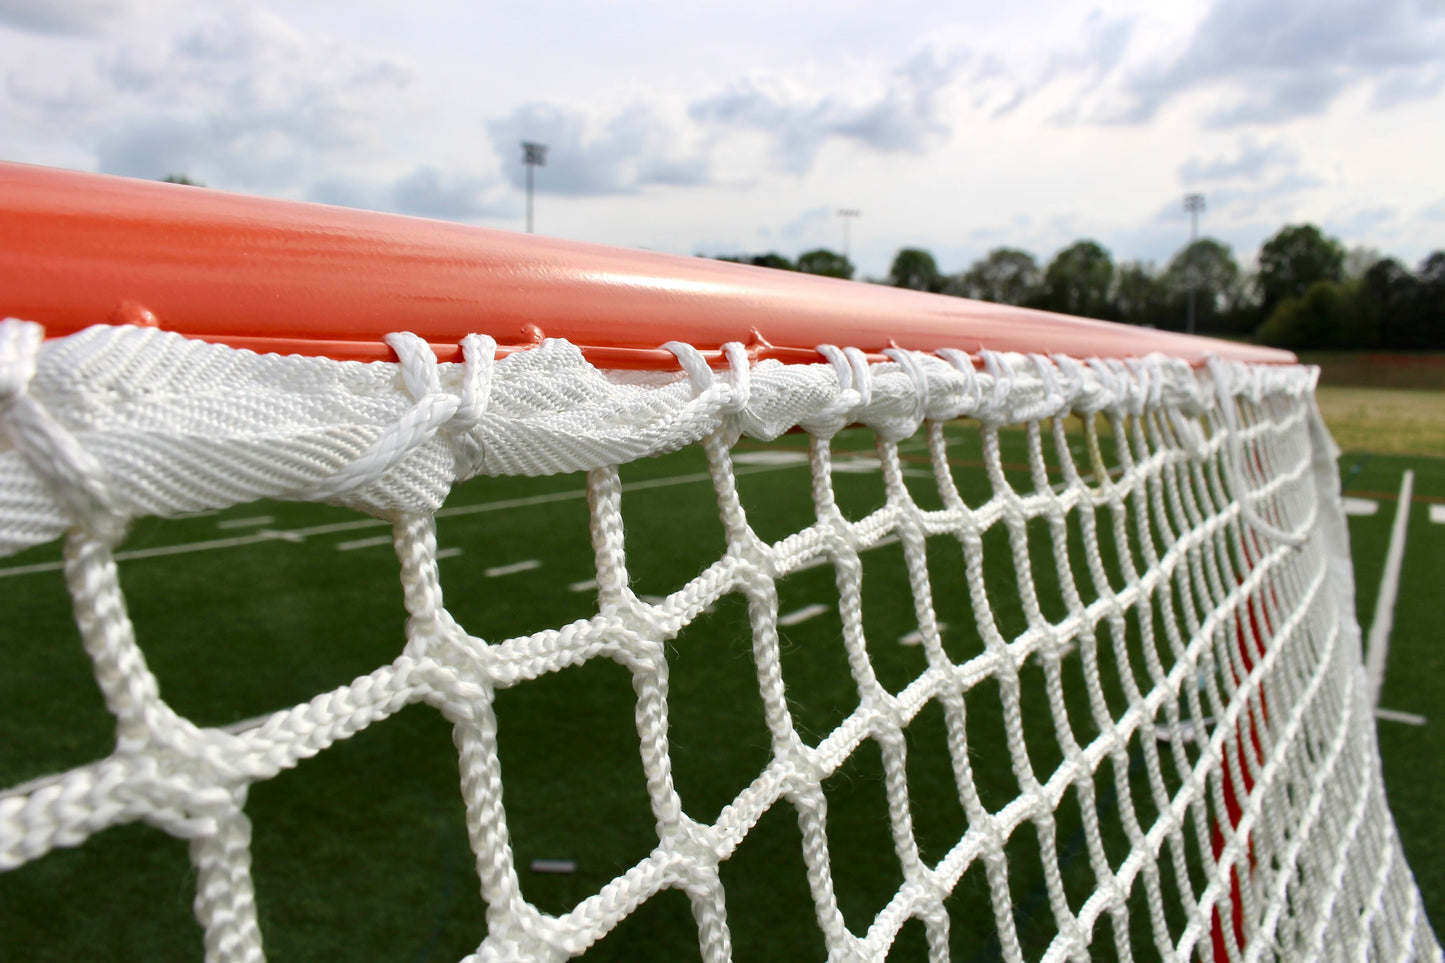 High School Practice Goal & 6mm Net Combo, 59 lbs, 6'x6'x7', Posts w/ Lacing Rails by Crankshooter® - Choice of white or black net - Free Shipping - #1 Selling Goal